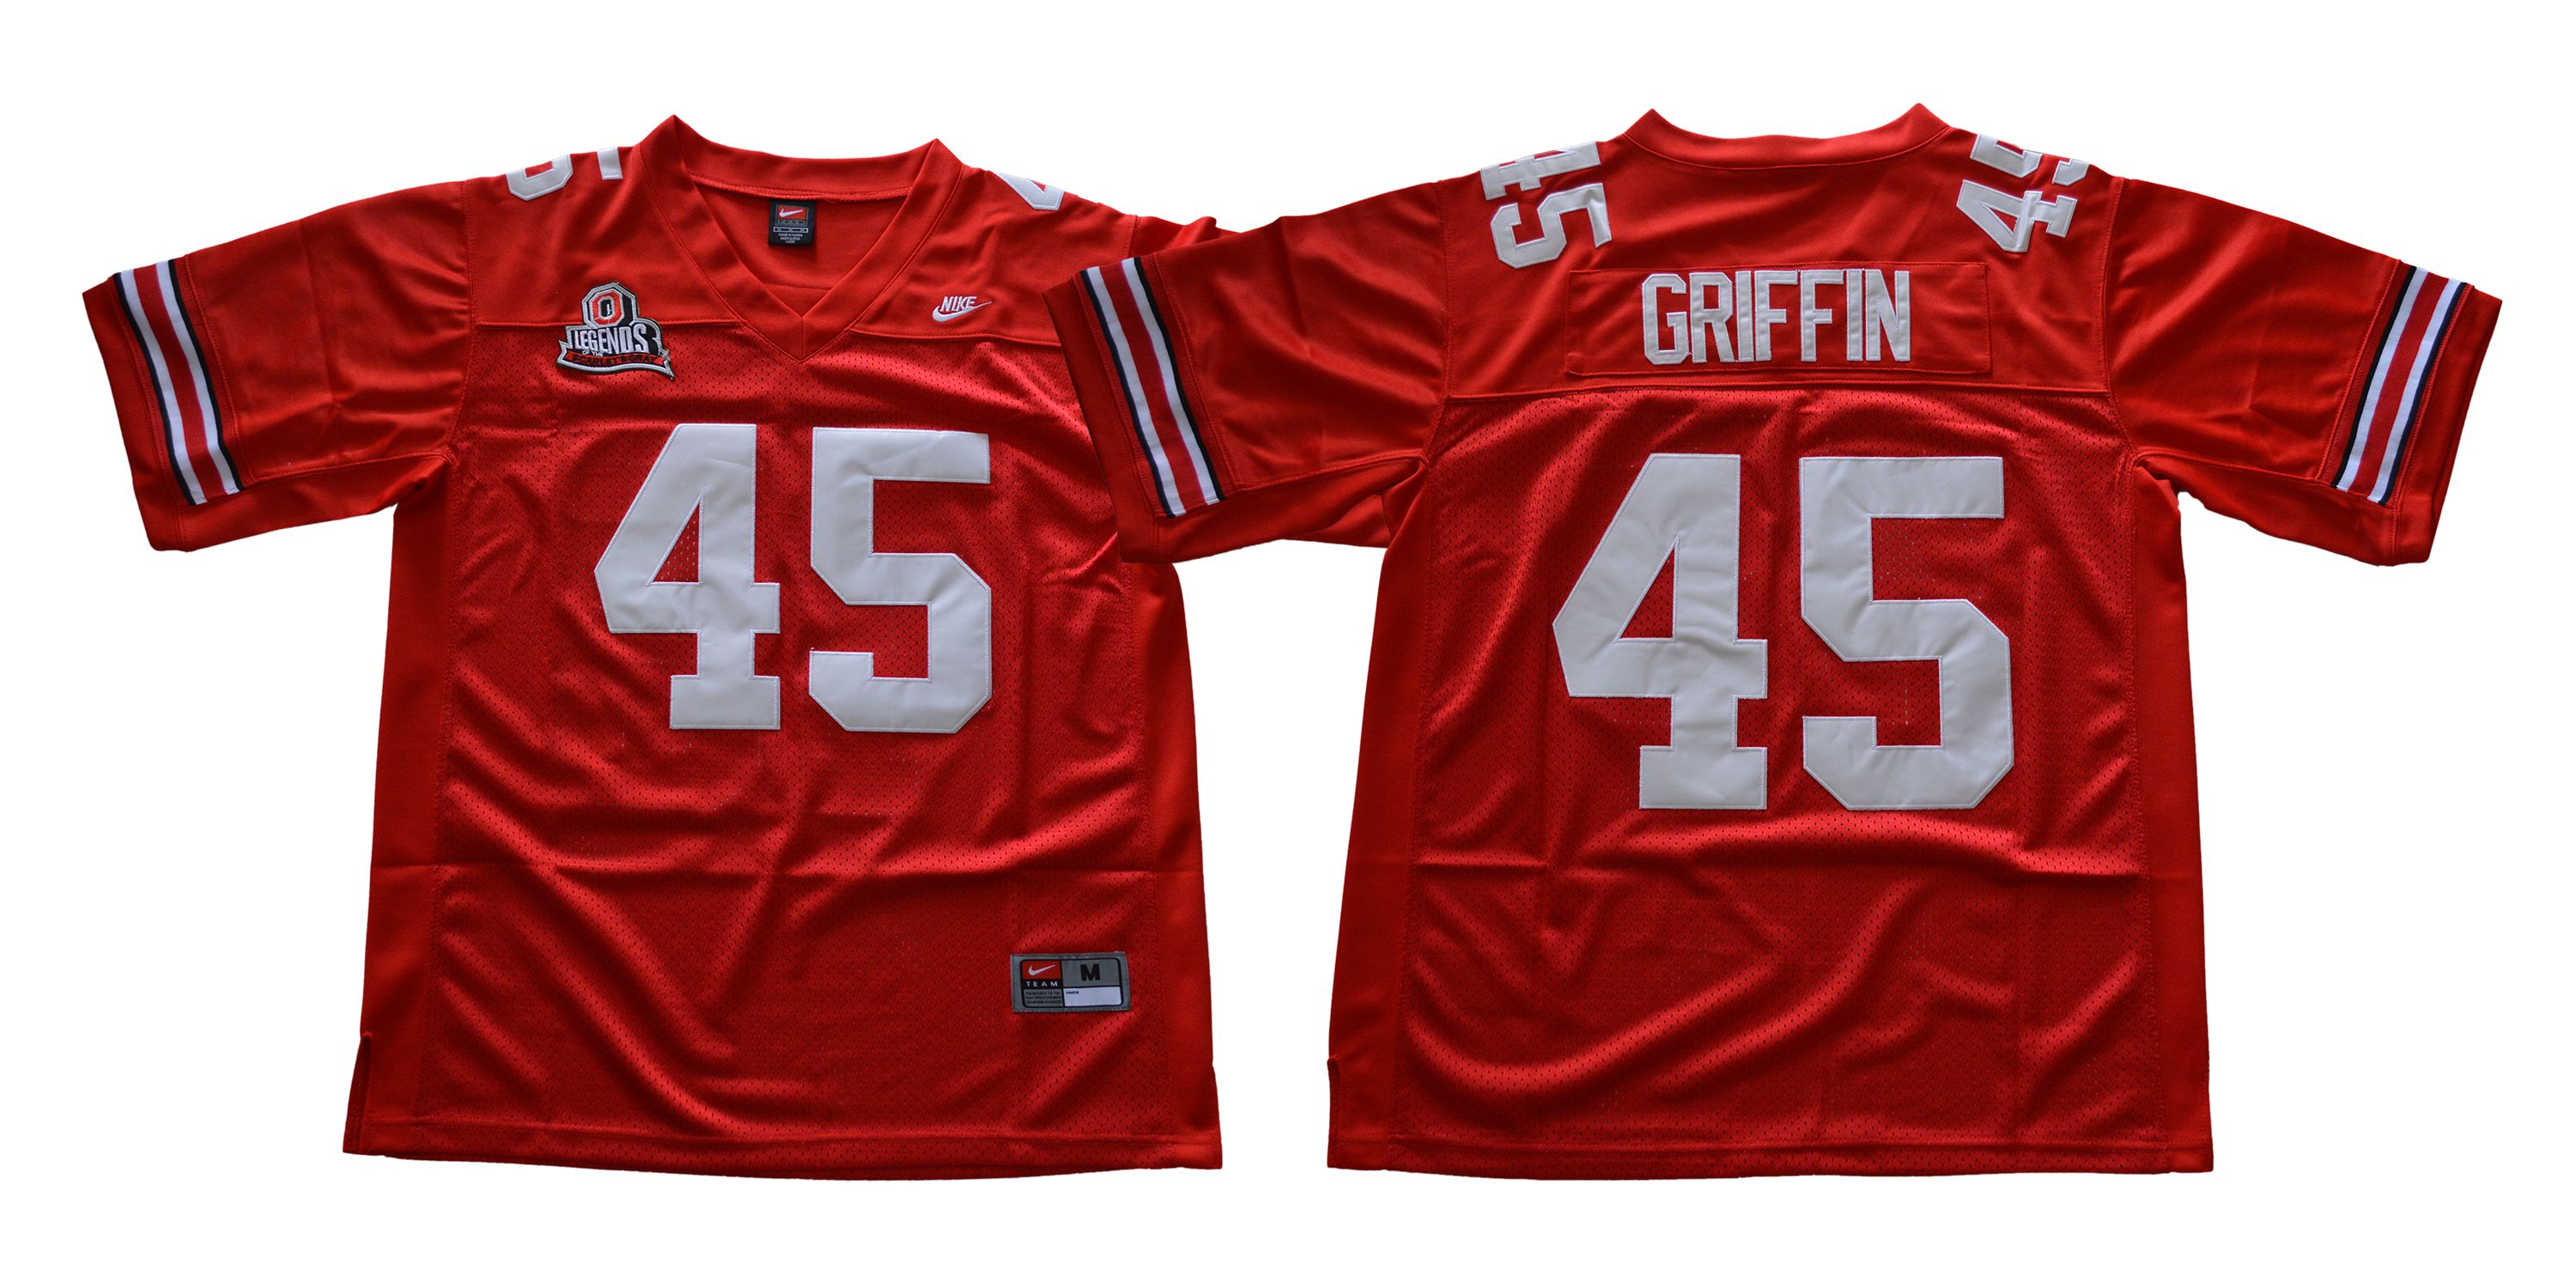 Men Ohio State Buckeyes #45 Griffin Red Throwback Nike NCAA Jerseys